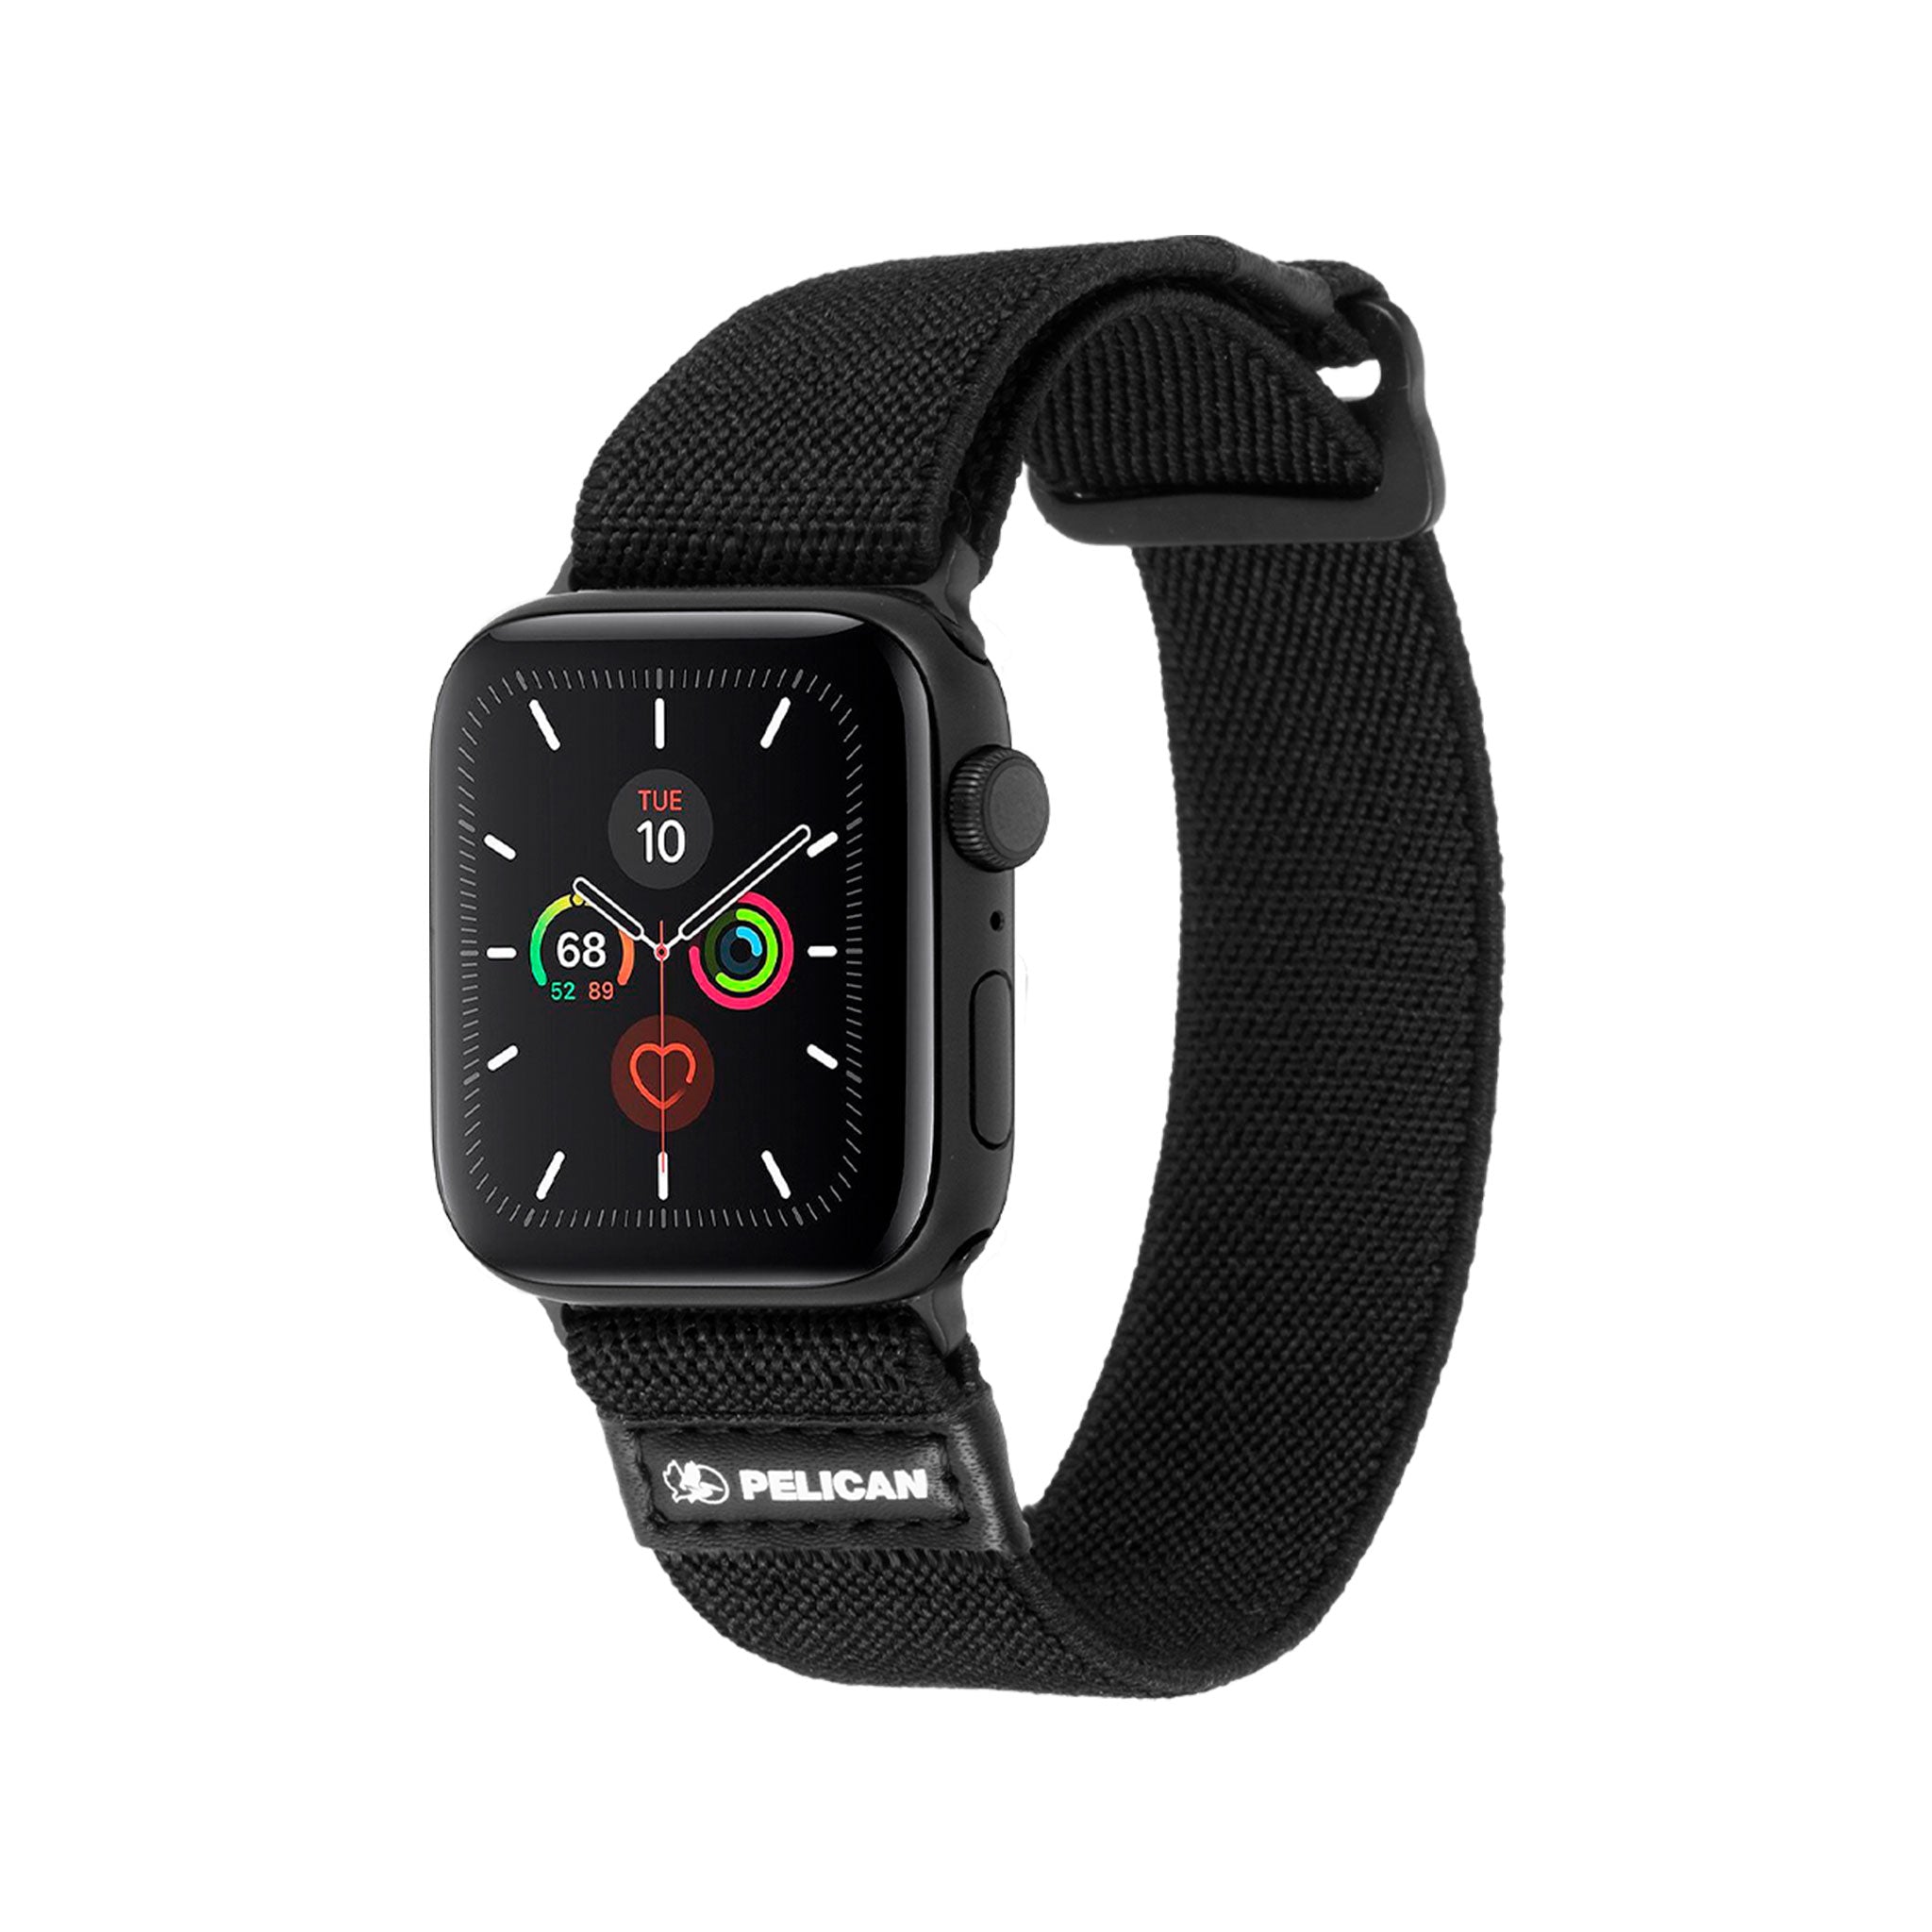 Pelican - Protector Watch Band For Apple Watch 42mm / 44mm - Black